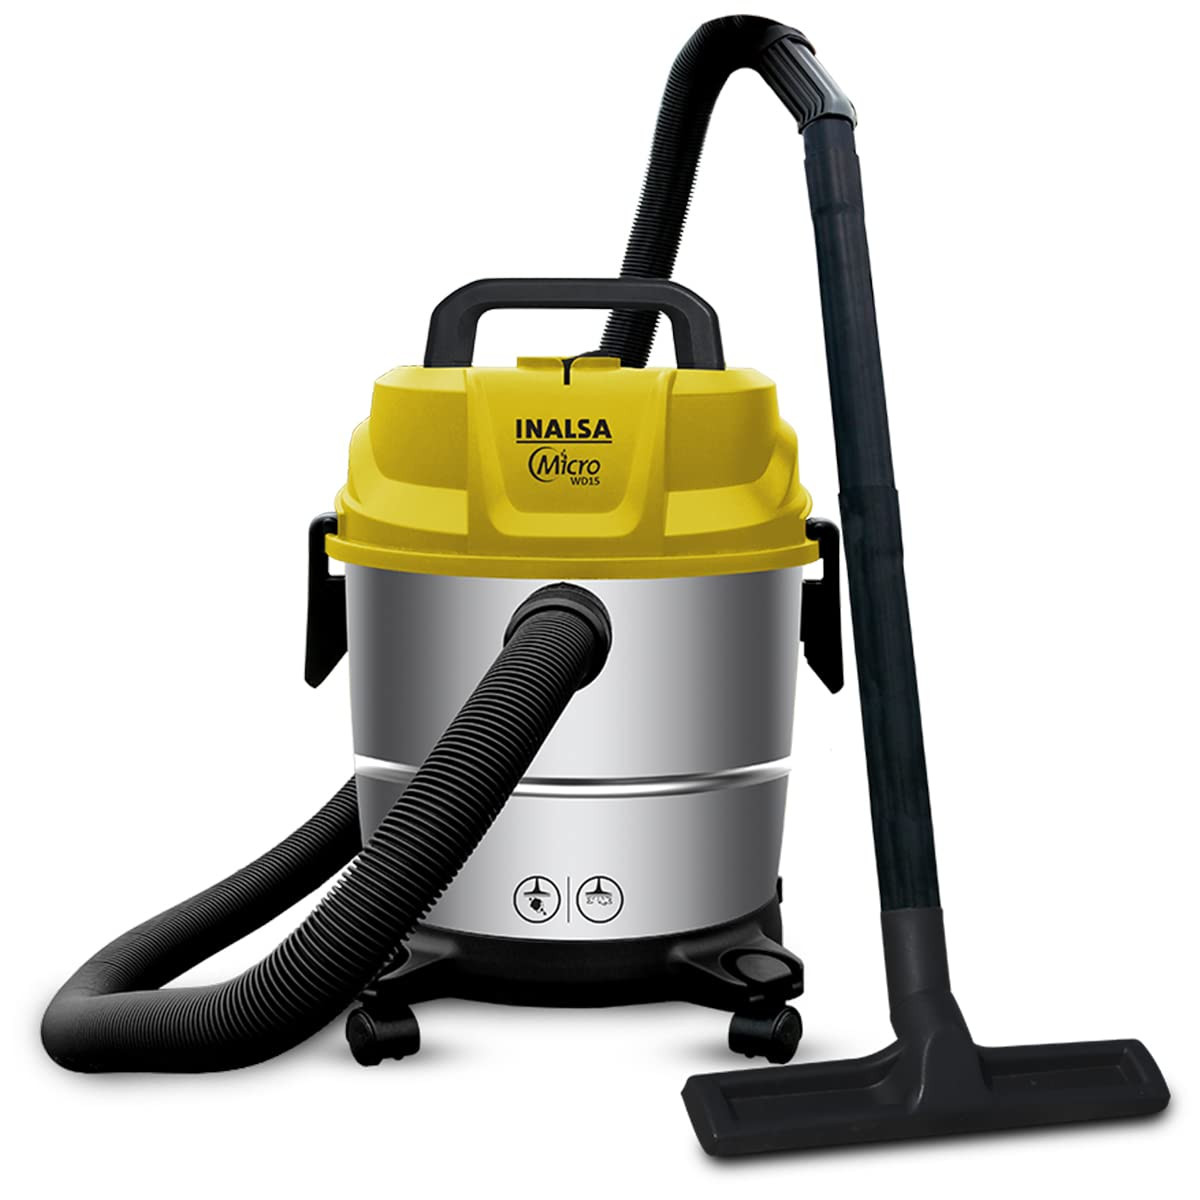 INALSA Wet and Dry Vacuum Cleaner for Home 15 ltr Capacity1400 W 20 kPa Suction  Blower FunctionHEPA Filter Wet Vacuum Cleaner for Sofa House Cleaning MachineStainless Steel Body WD 15